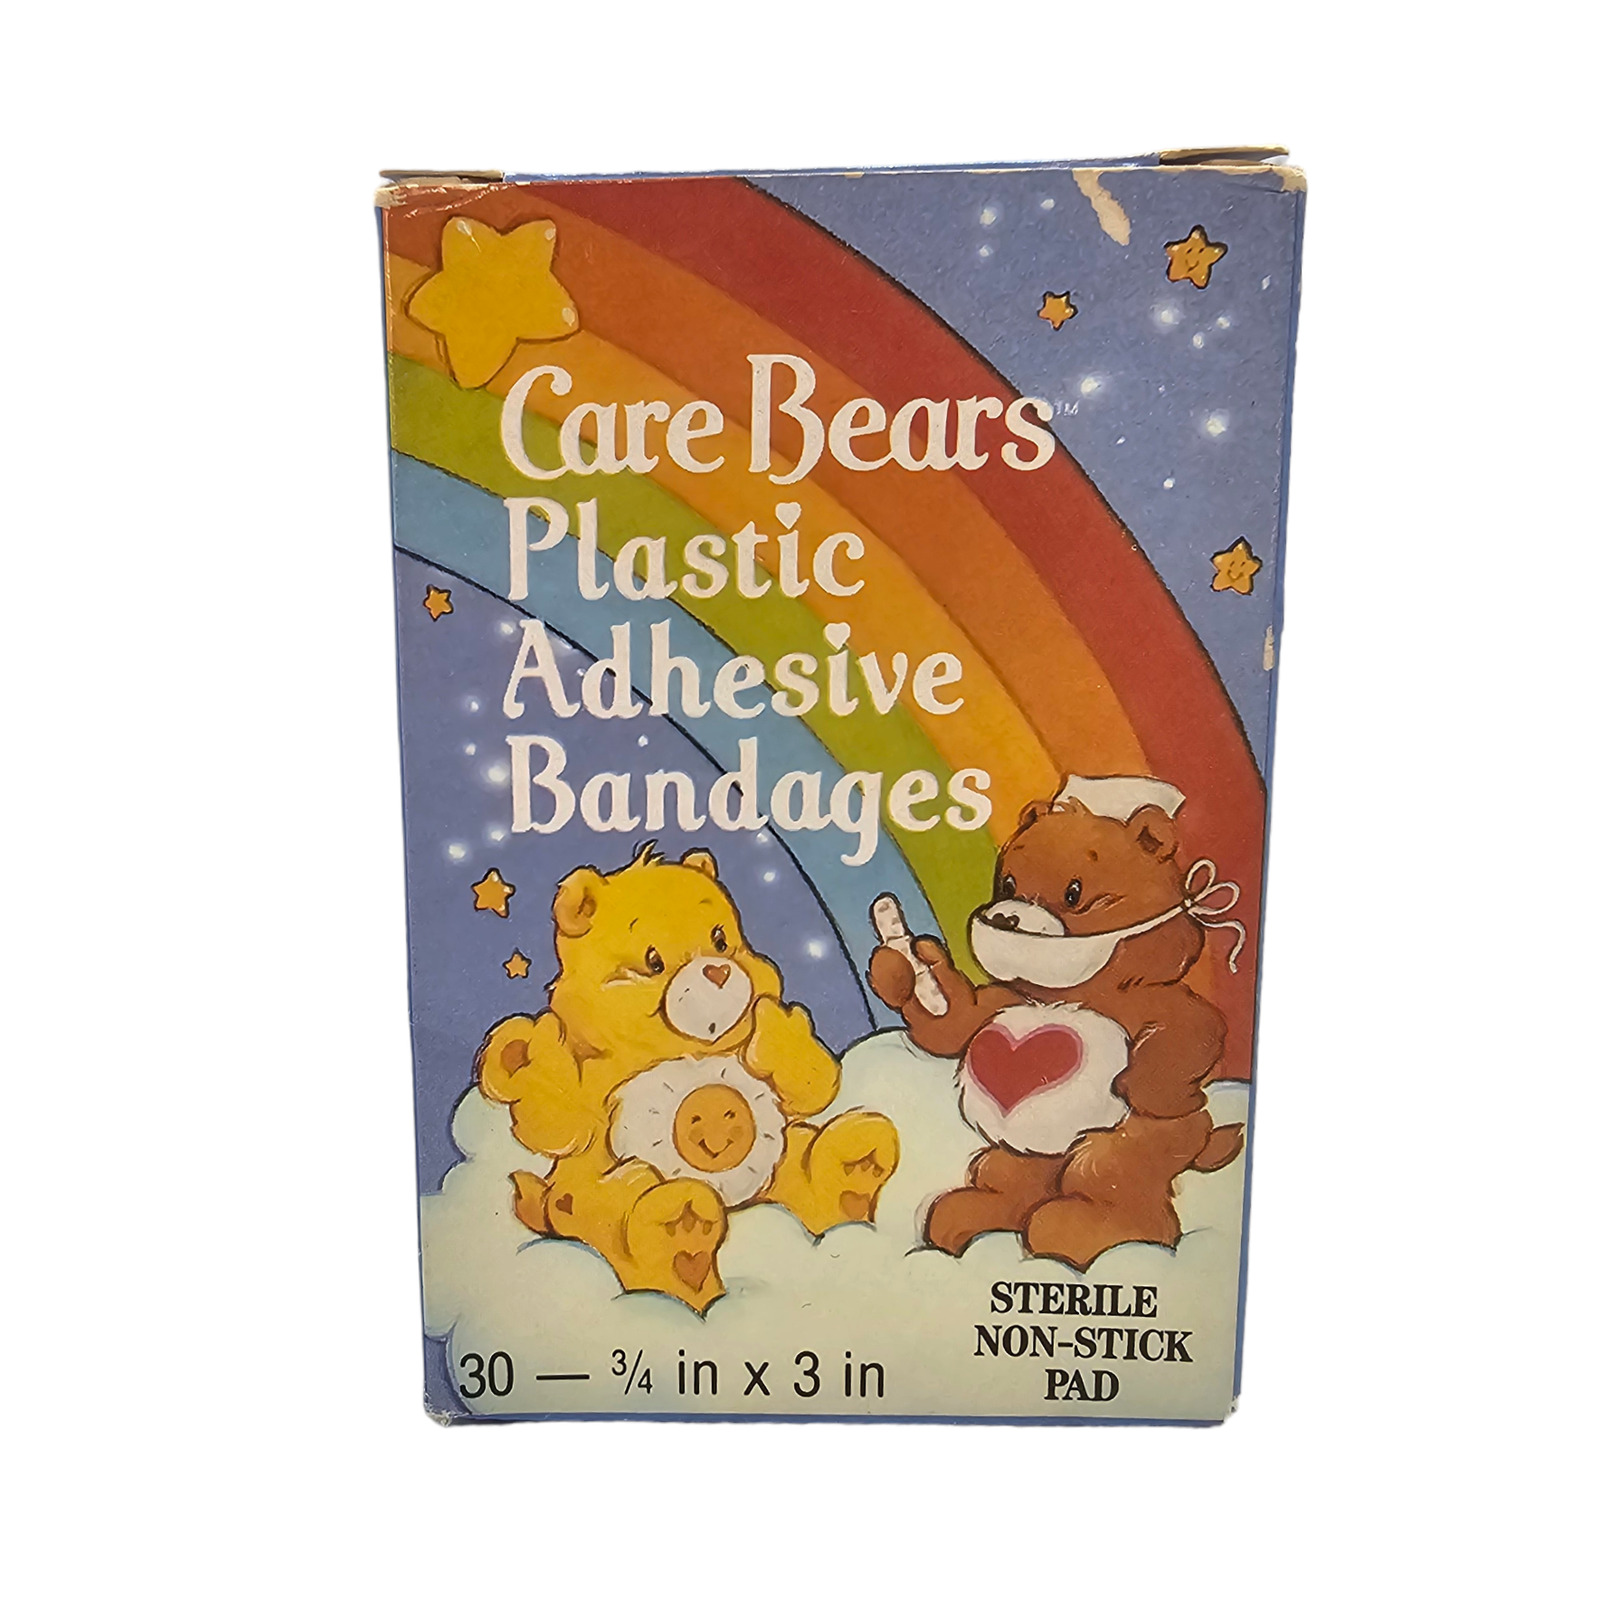 Vintage Care Bears Plastic Adhesive Bandages 1986 29-In Box